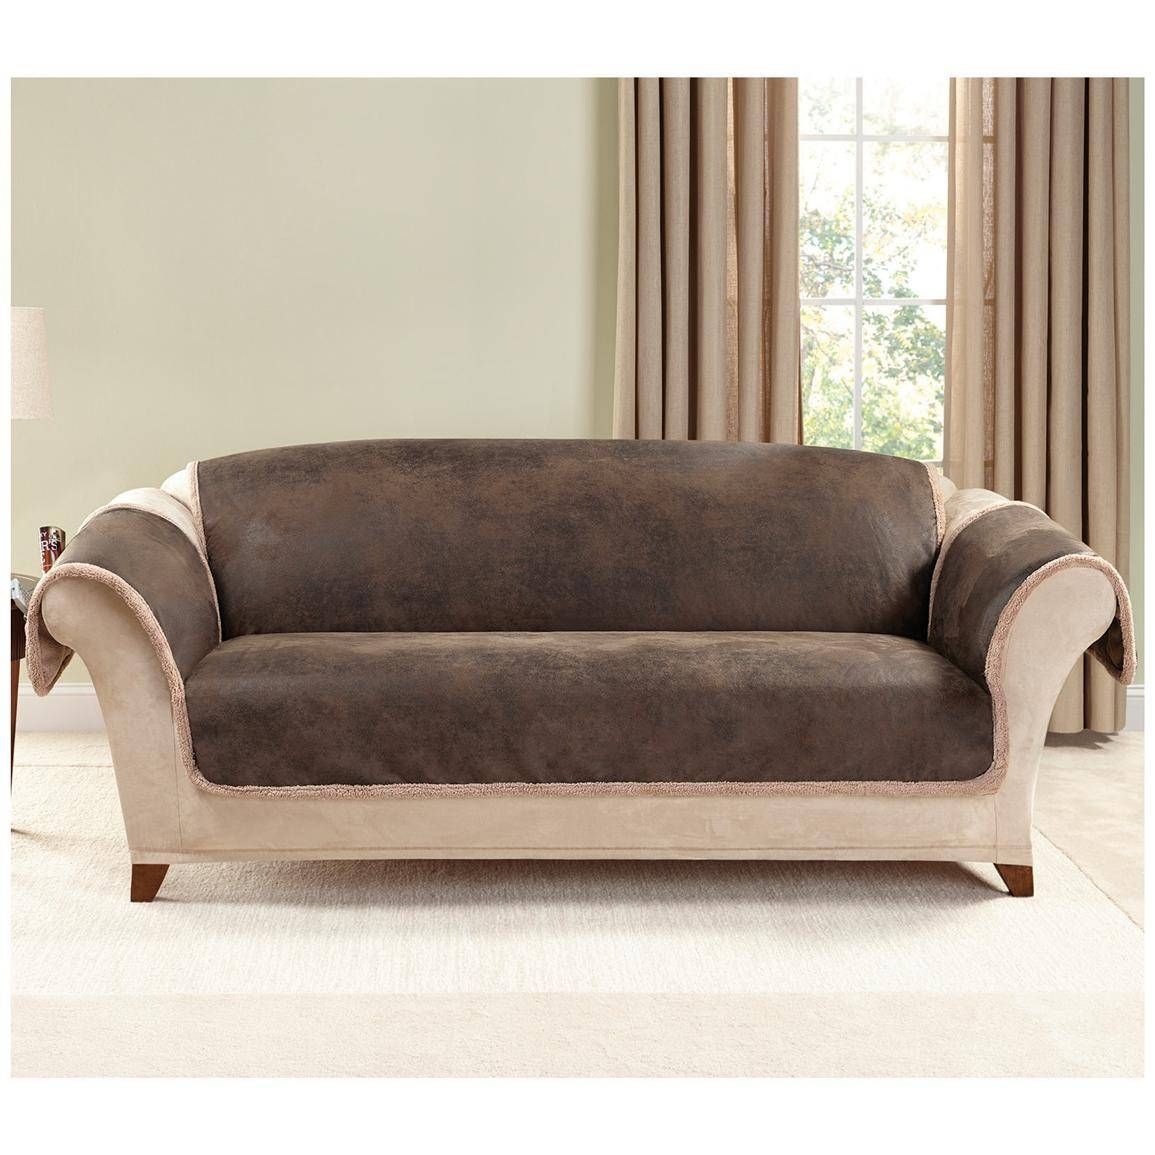 Sure Fit® Leather Furn Friend Sofa Slipcover – 581243, Furniture With Regard To Slipcover For Leather Sofas (View 5 of 30)